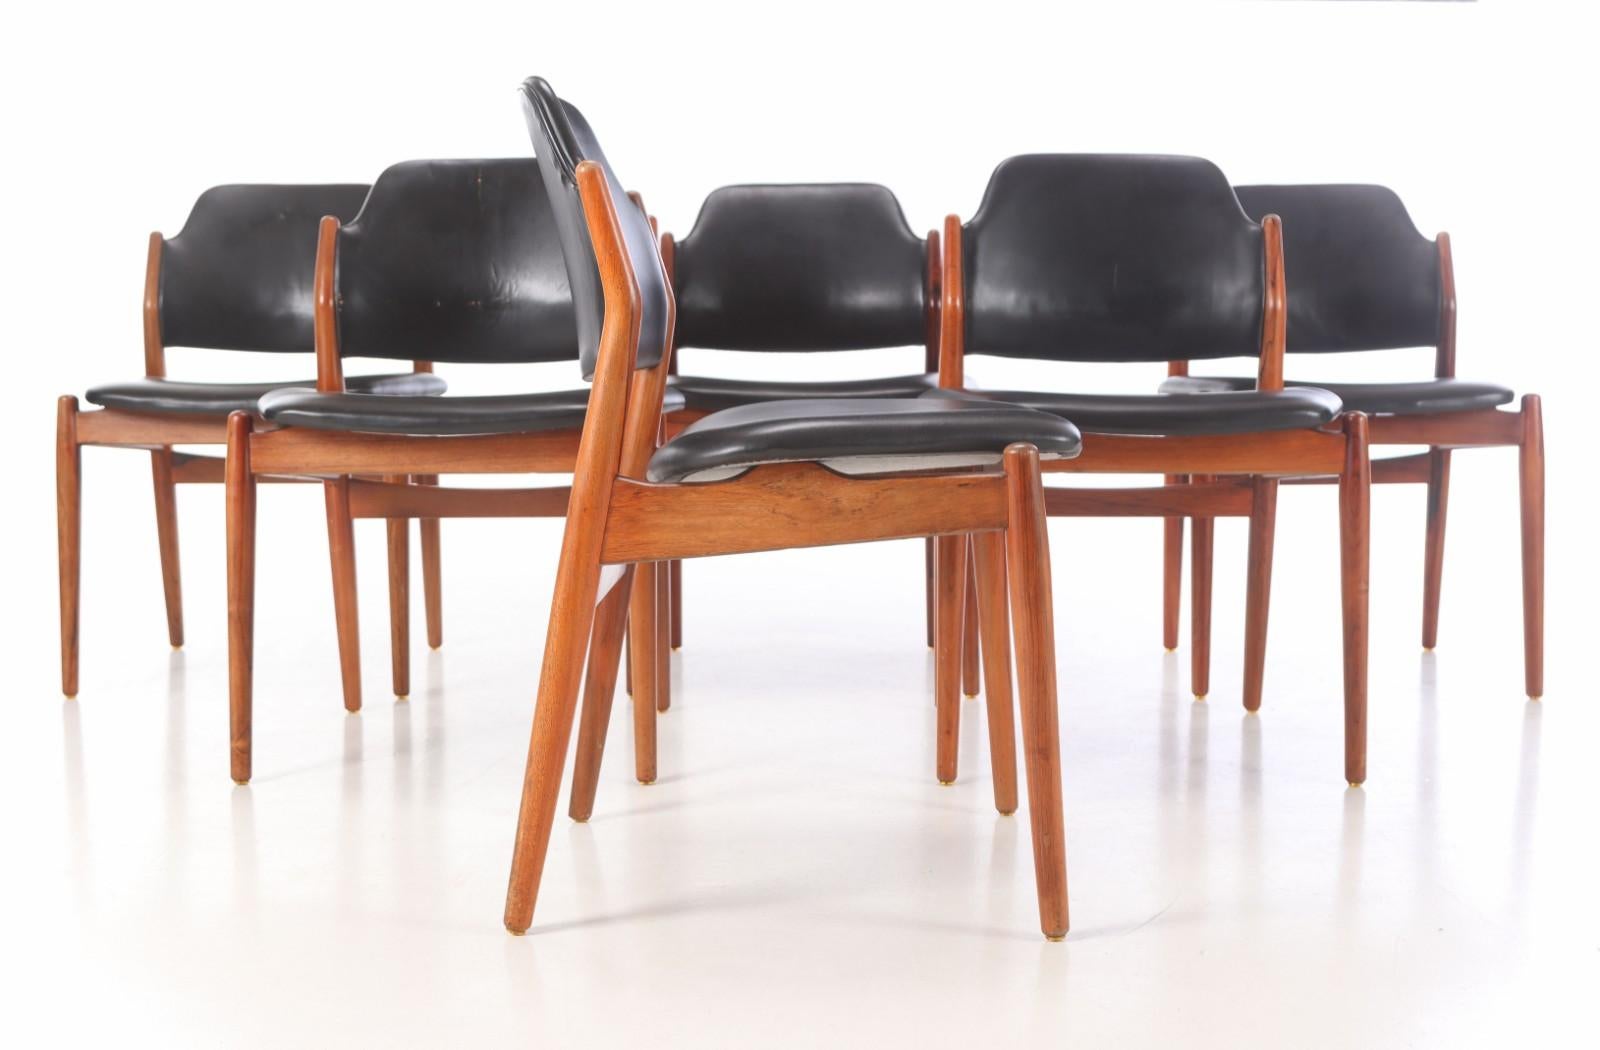 Magnificent and rare set of 6 62S chairs designed by Arne Vodder. A clean and refined design down to the smallest detail. The solid rosewood structure has very beautiful lines and curves which form a harmonious whole with the leather of the seats